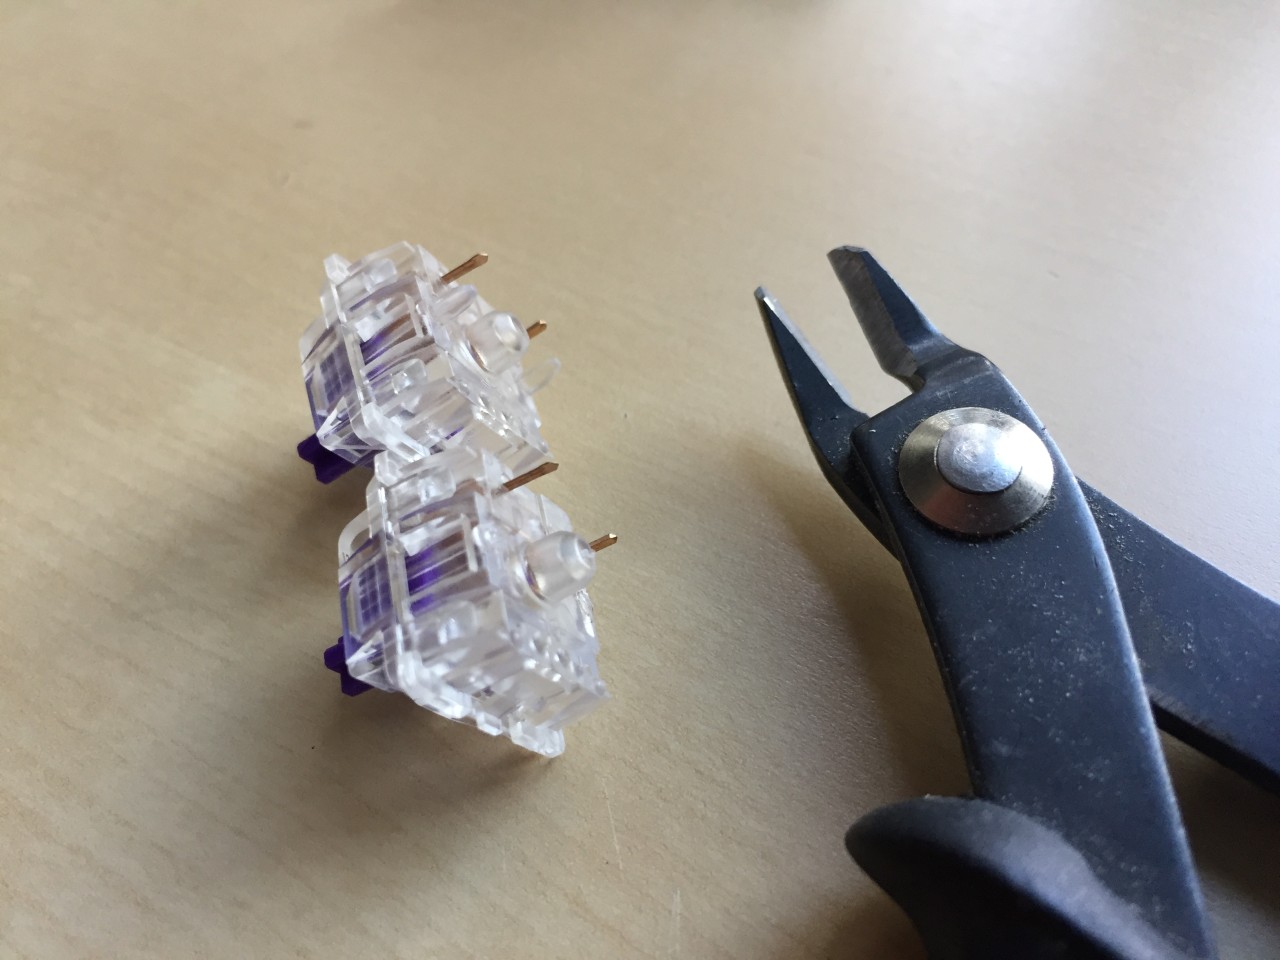 Switches before and after cutting off the PCB mounting tabs